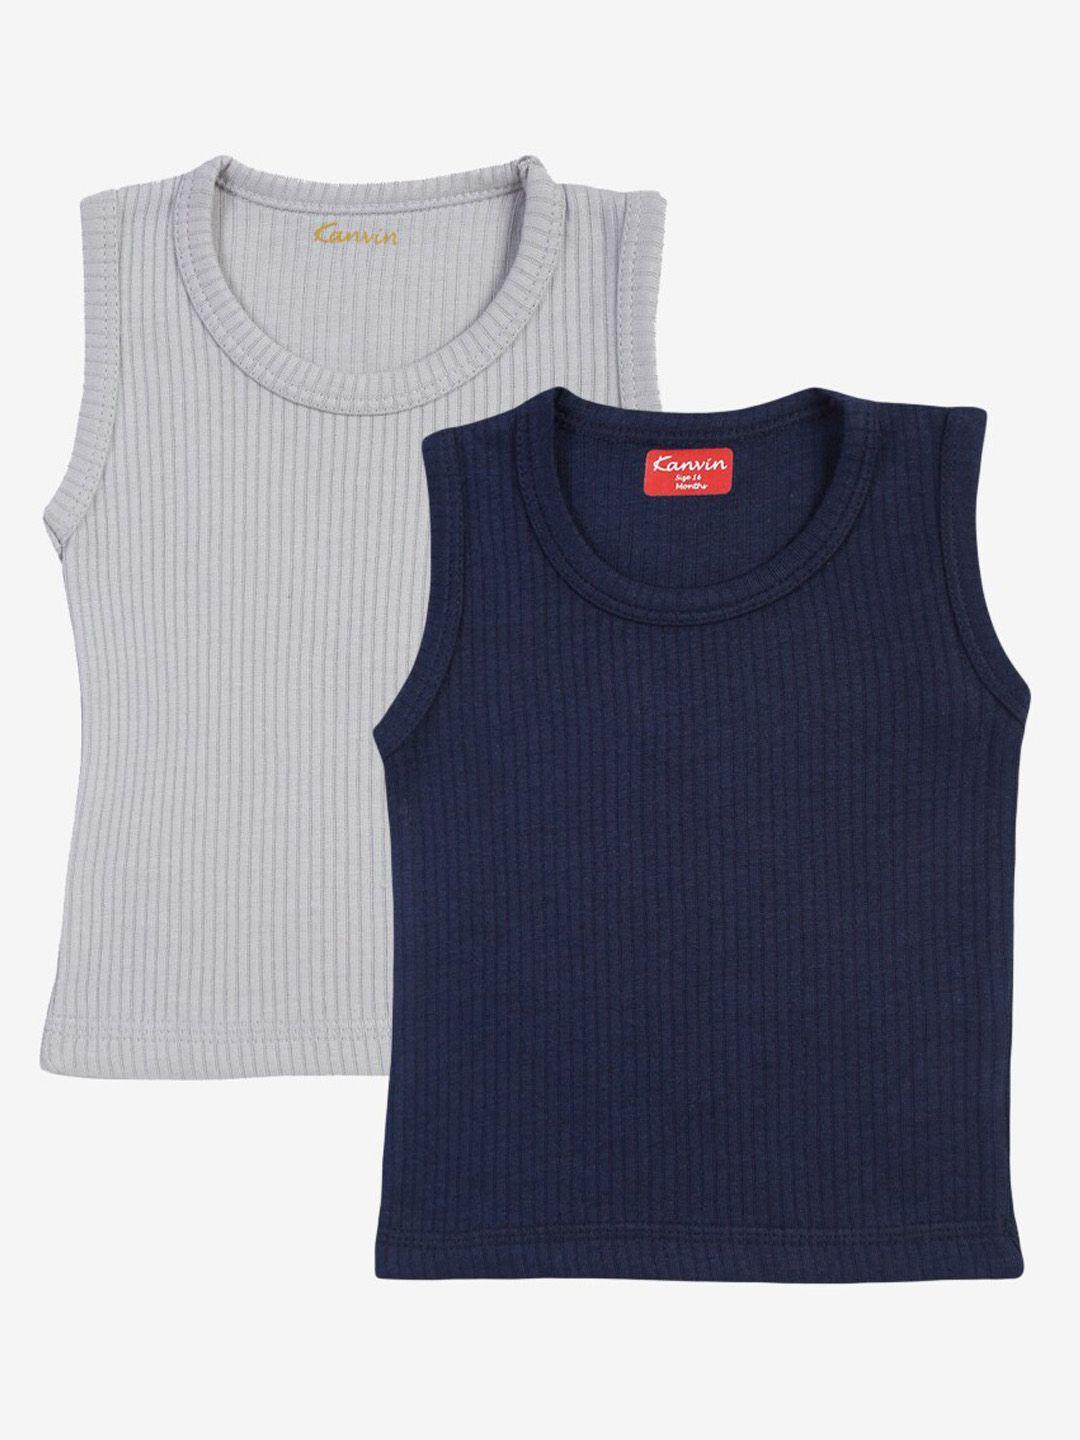 kanvin boys grey and navy blue pack of 2 solid thermal tops